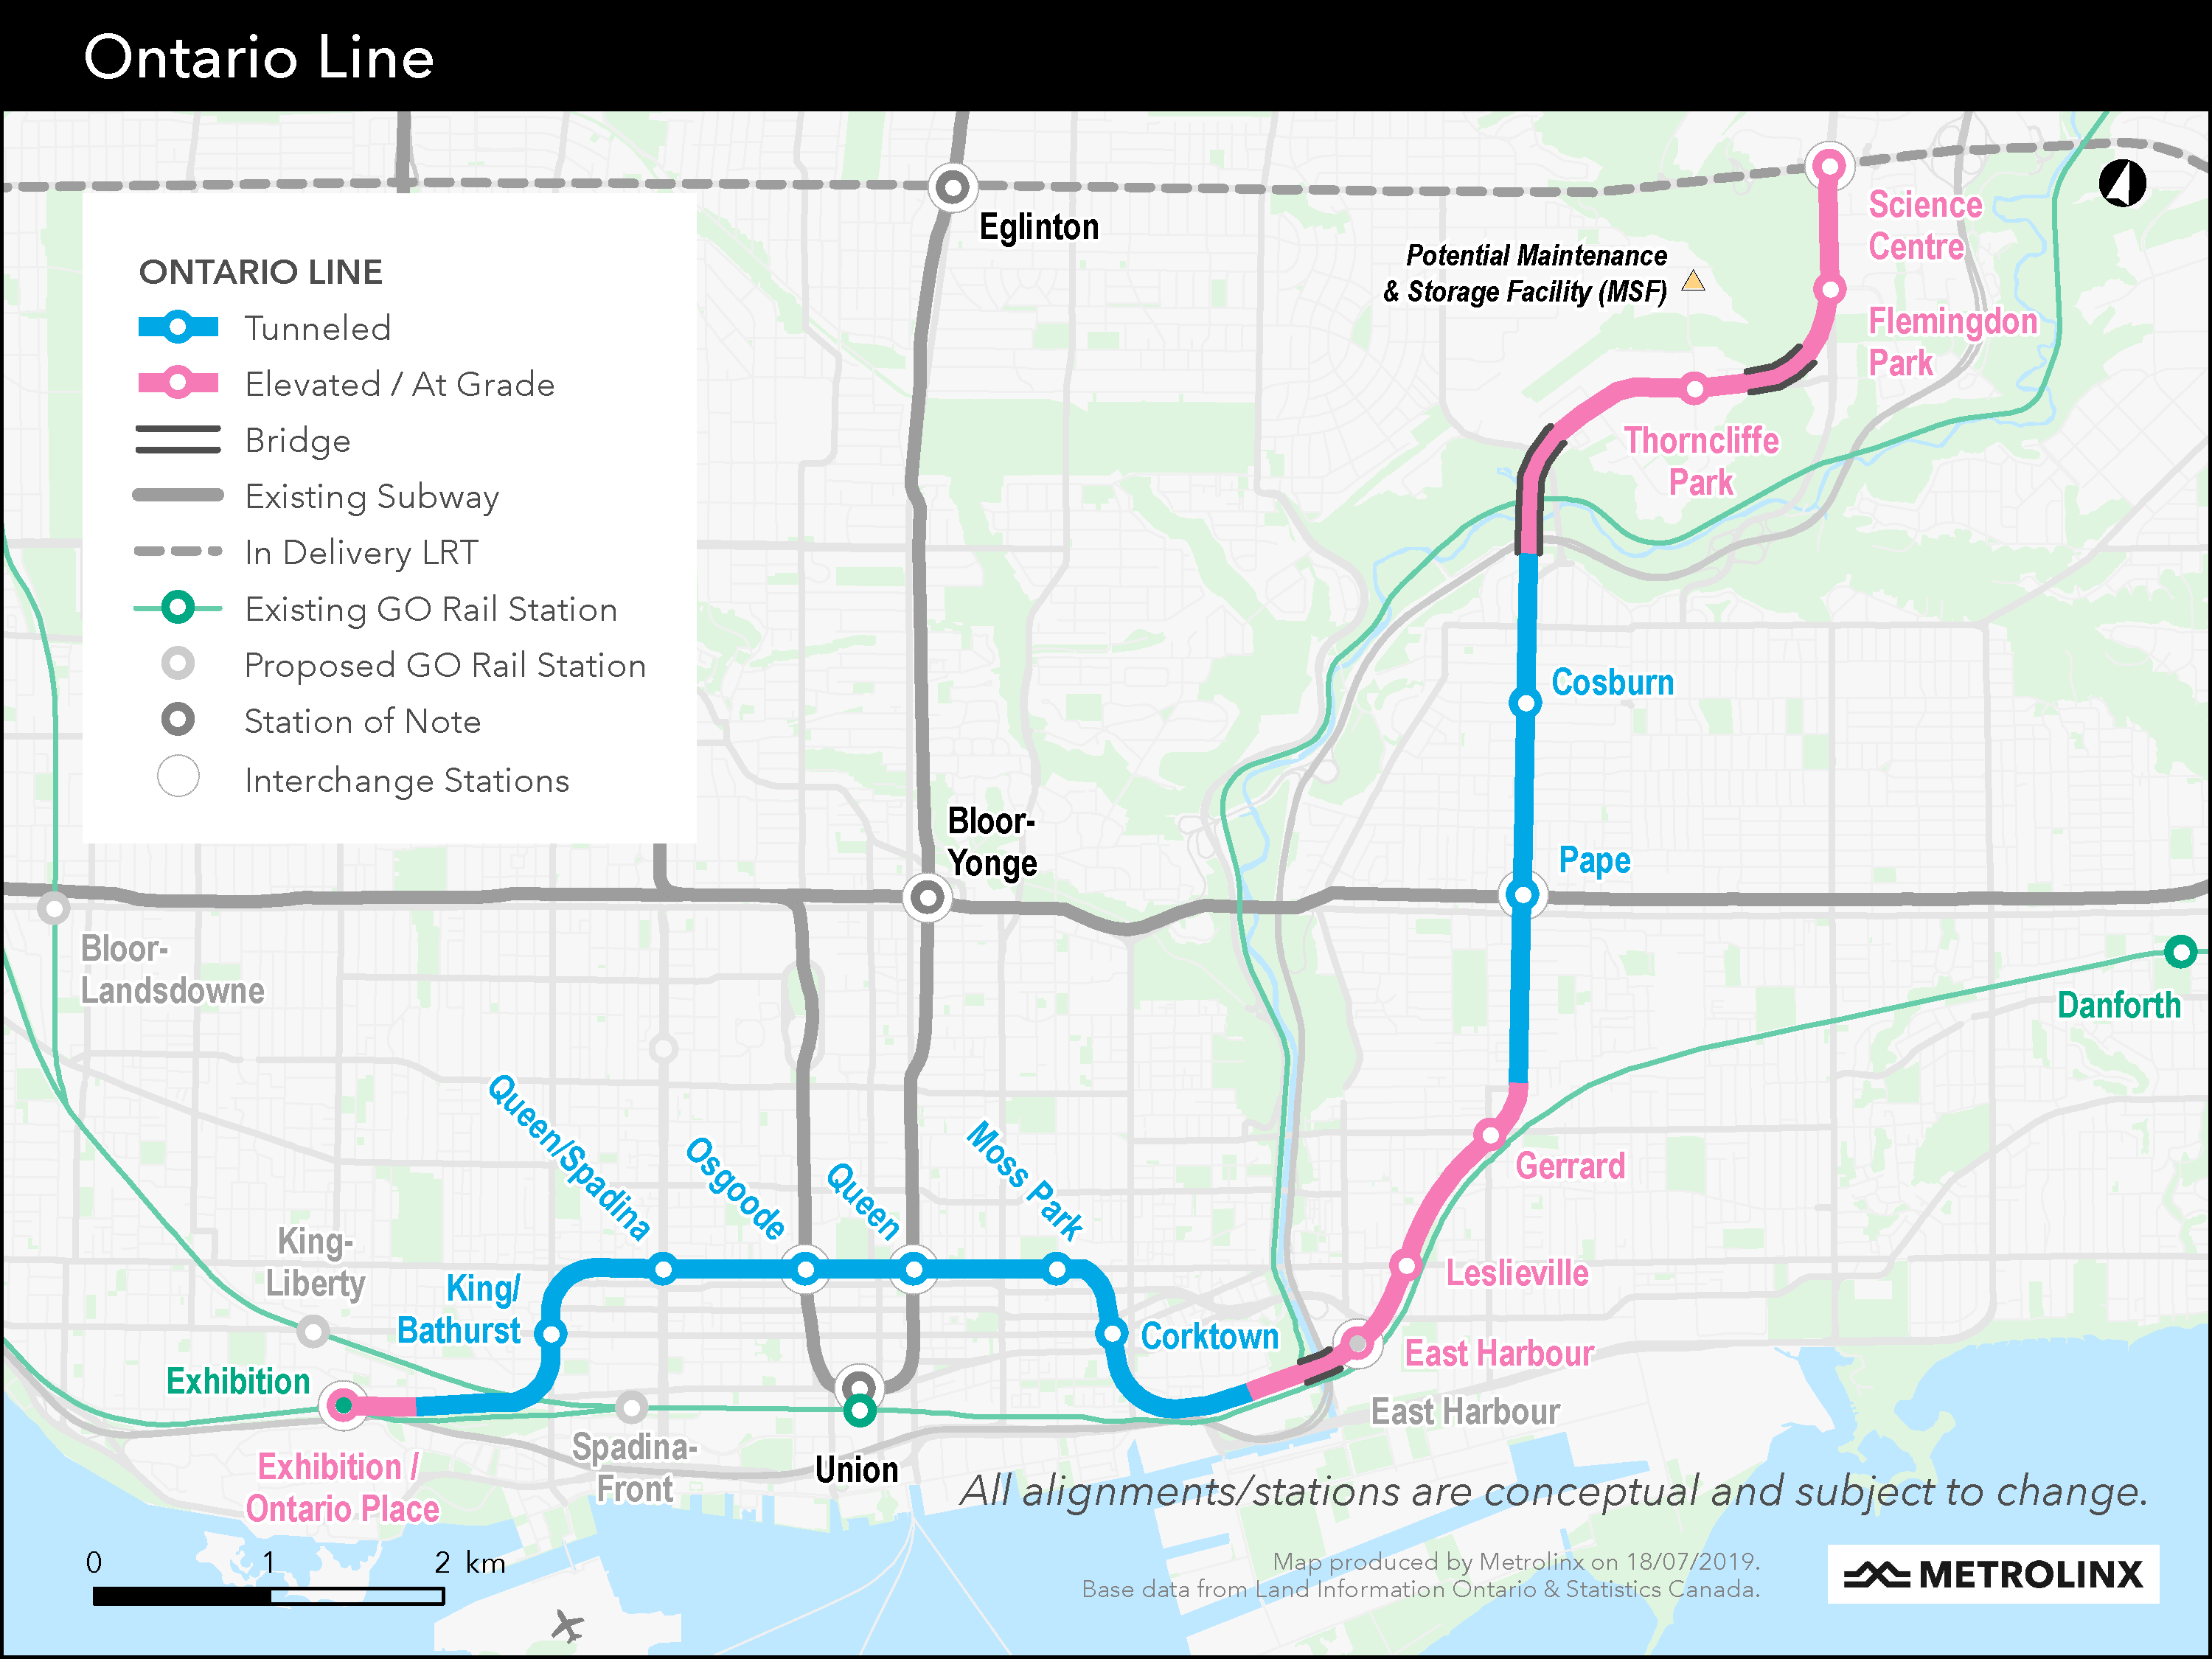 A map of the Ontario Line is shown.